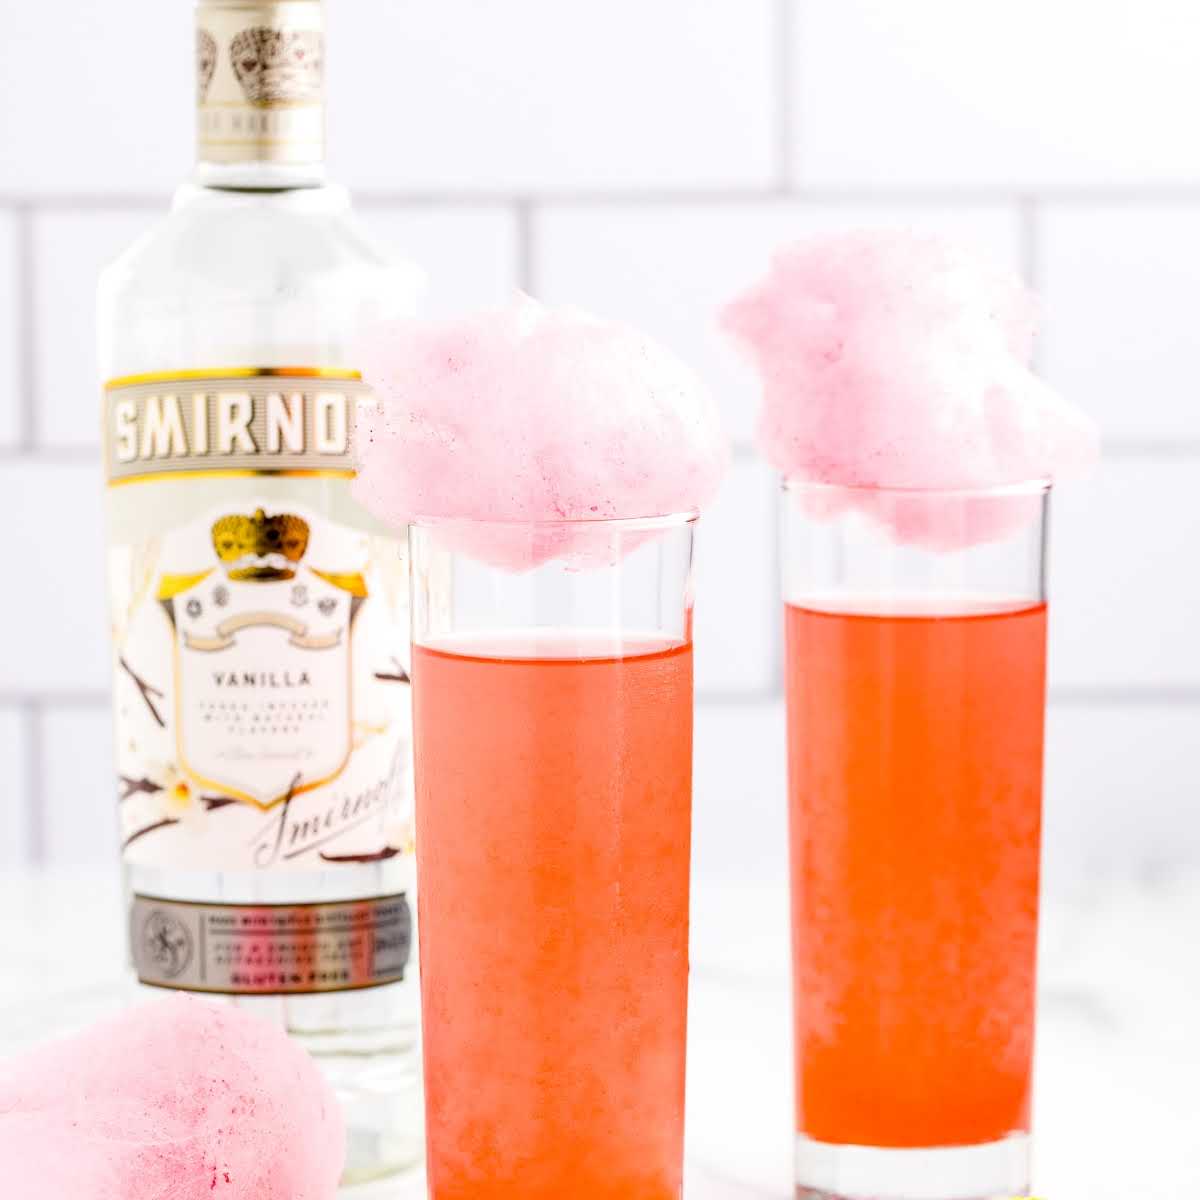 https://spaceshipsandlaserbeams.com/wp-content/uploads/2022/10/Cotton-Candy-Cocktail-Recipe-Card.jpg